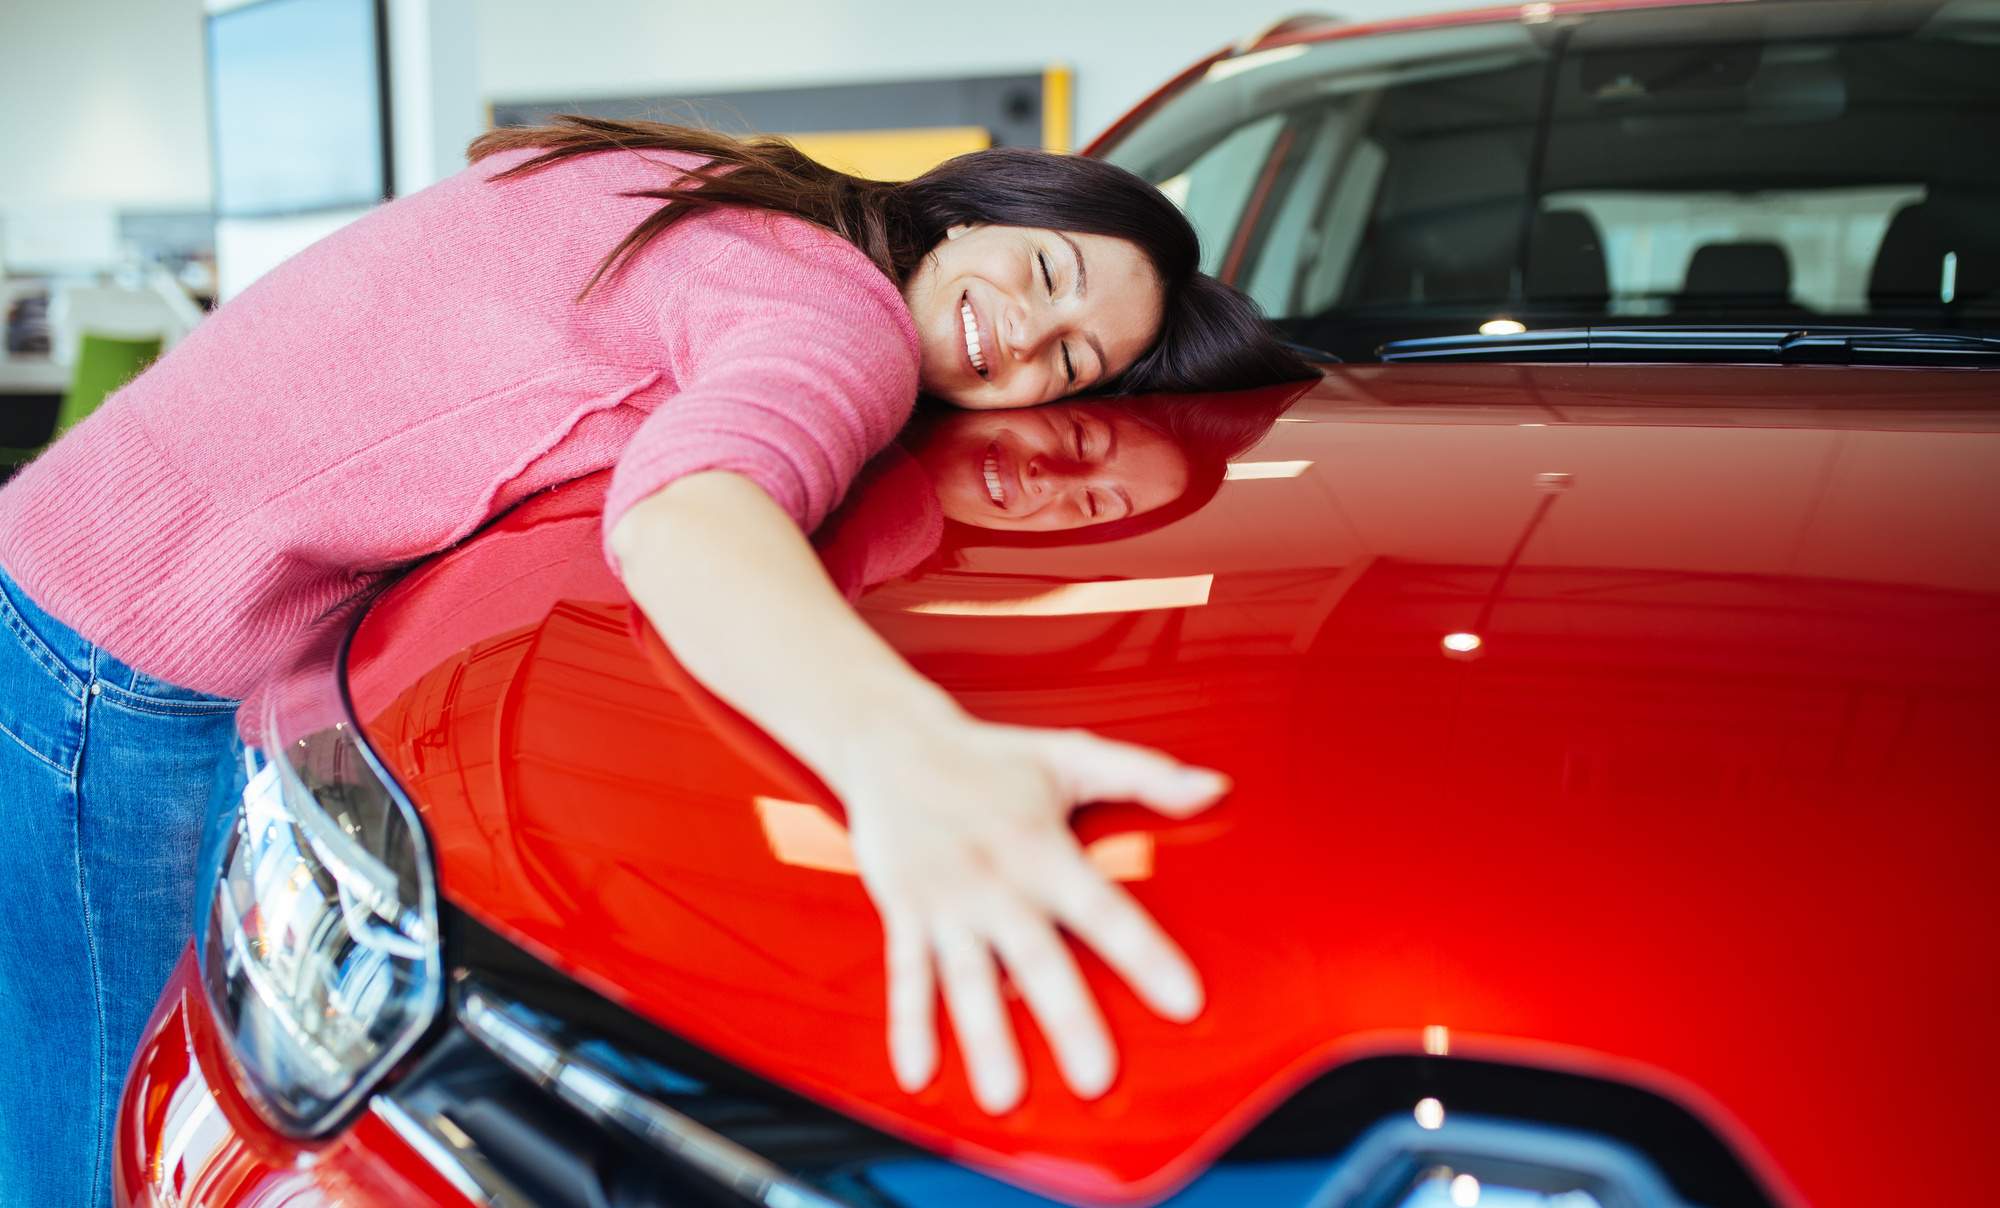 Buying a New Car: 8 Things to Consider